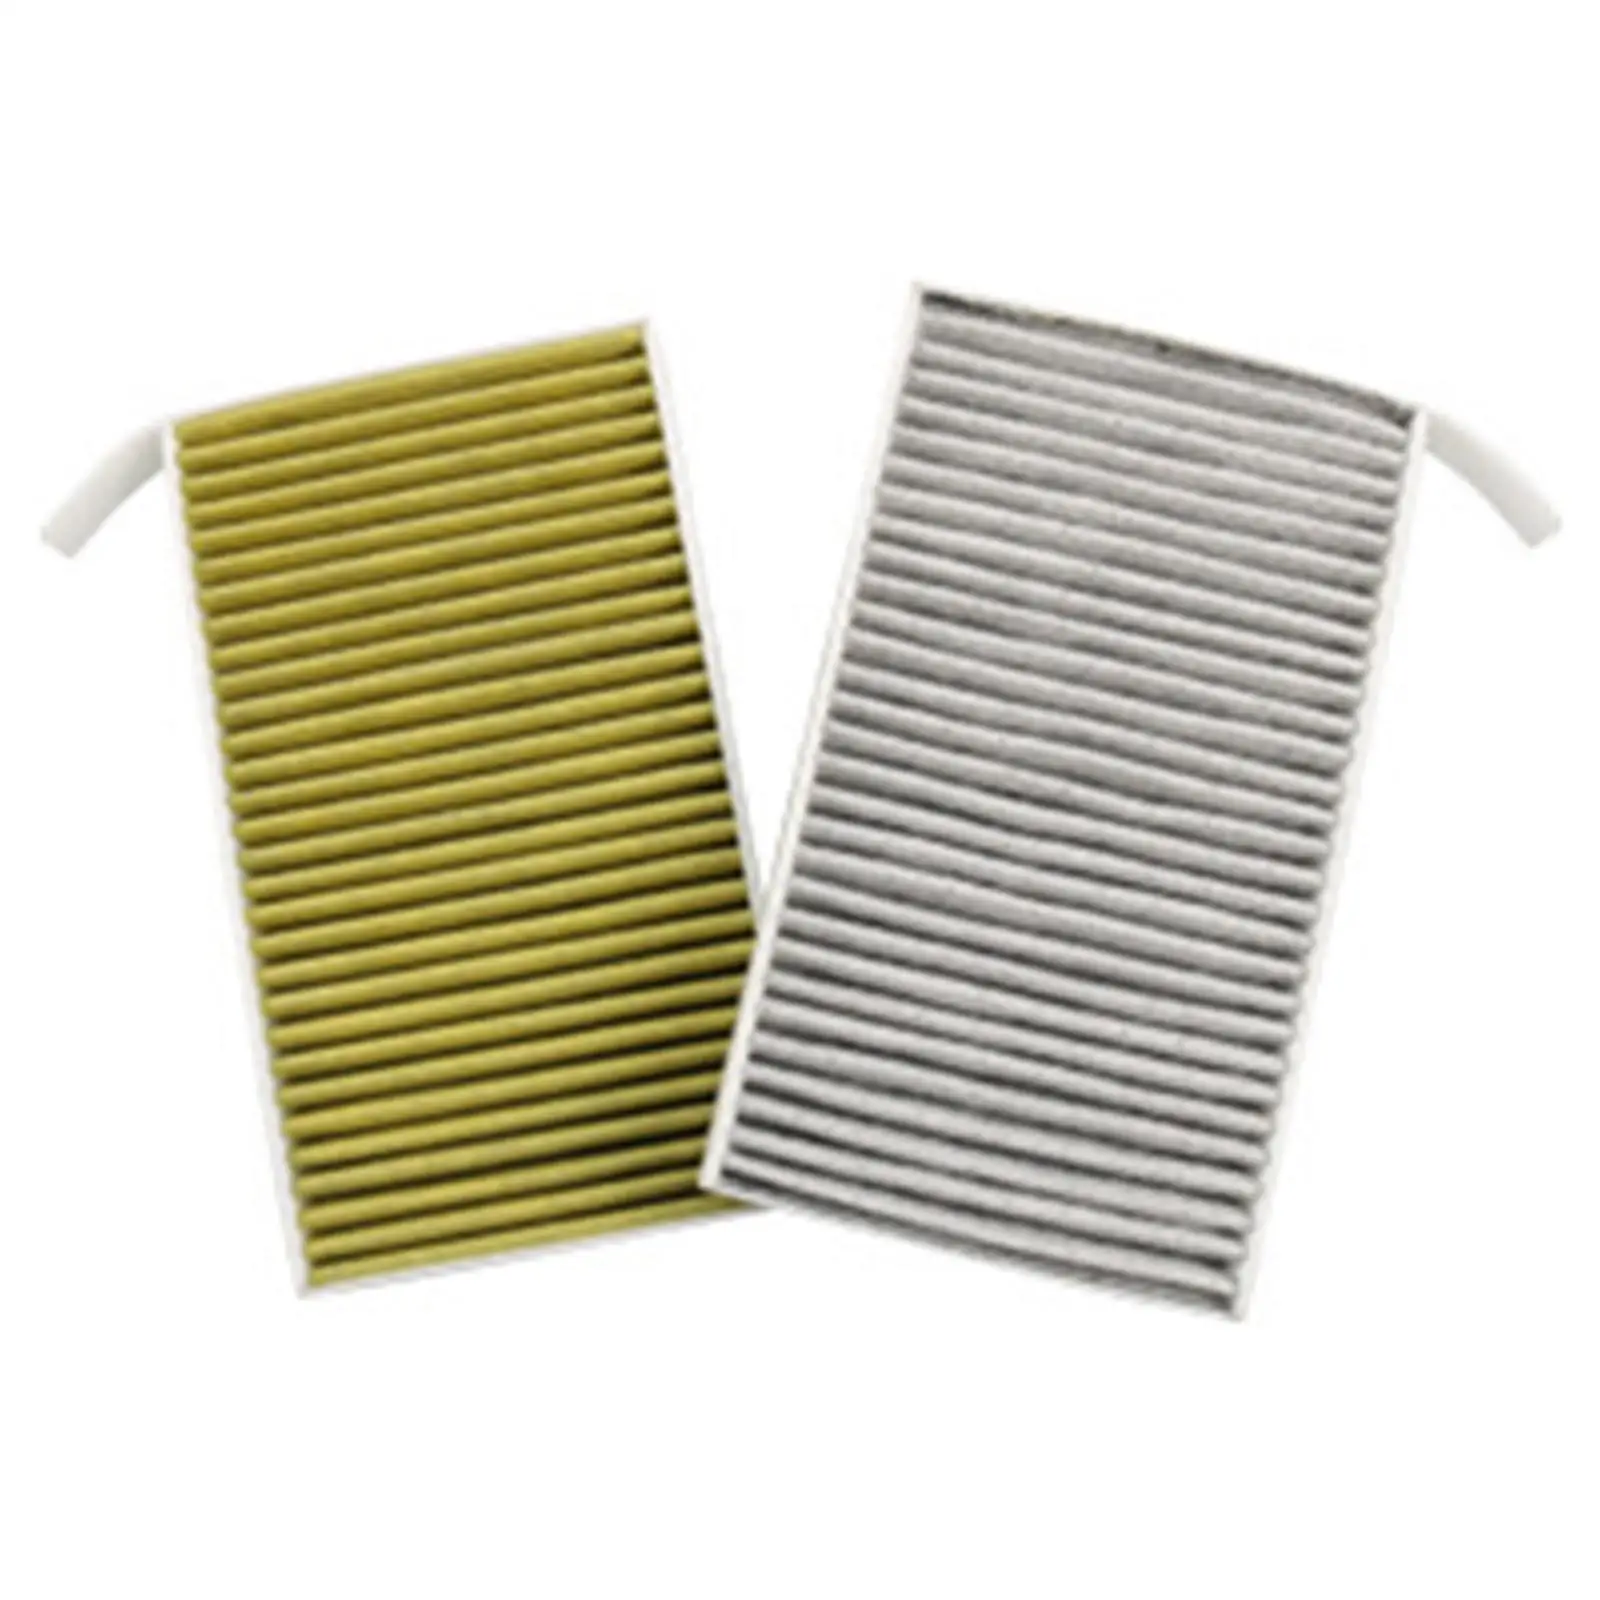 2x Carbon Air Filter Auto Parts Replacement Car Supplies Cabin Filter Fit for Tesla Model 3 2017-2021 1107681-00-A 110768100A